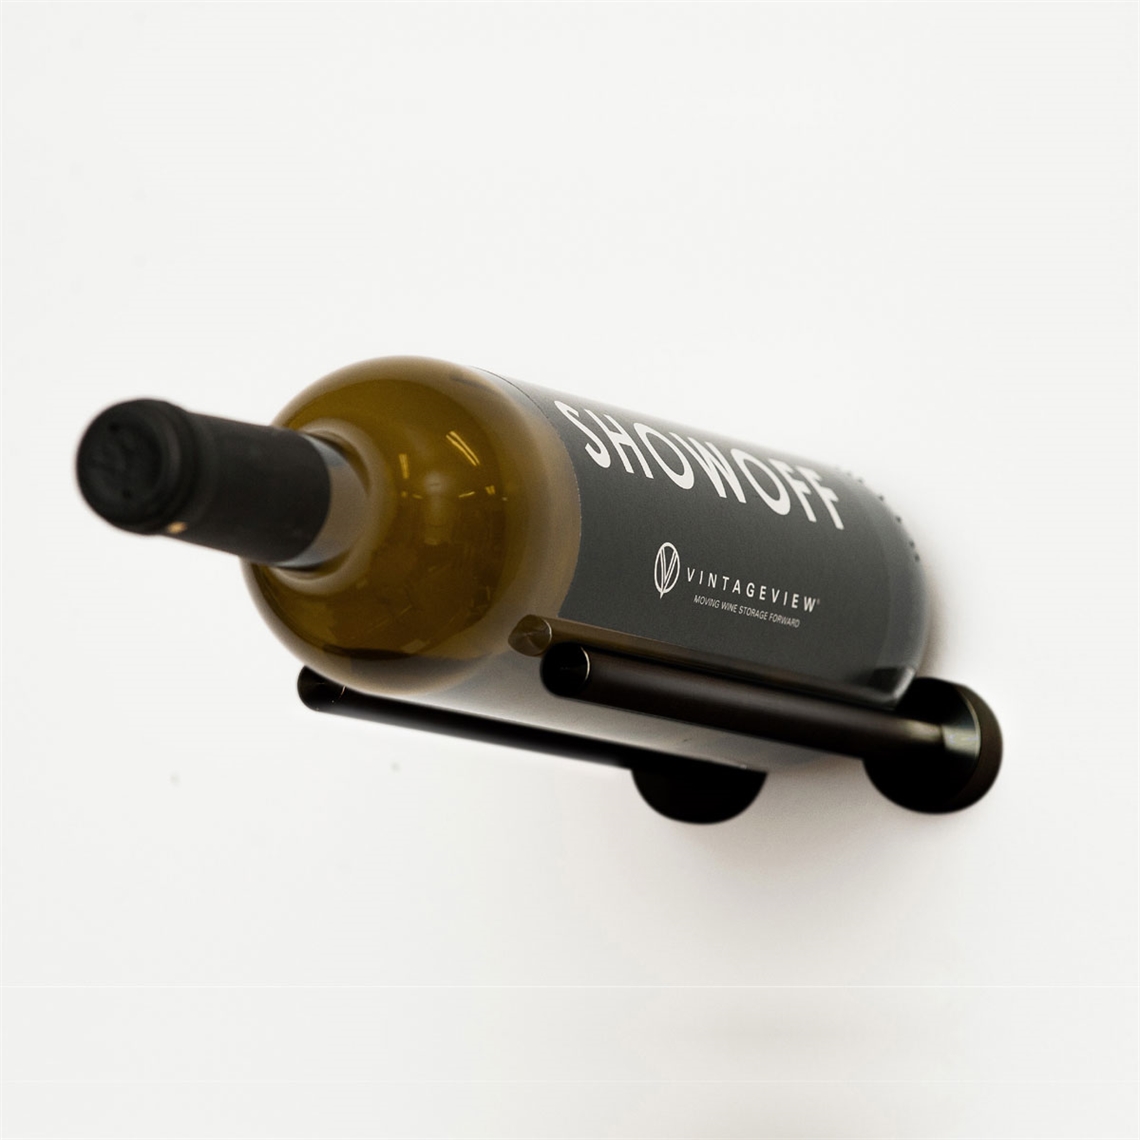 View more self assembly melamine wine racks from our Wall Mounted Wine Racks range